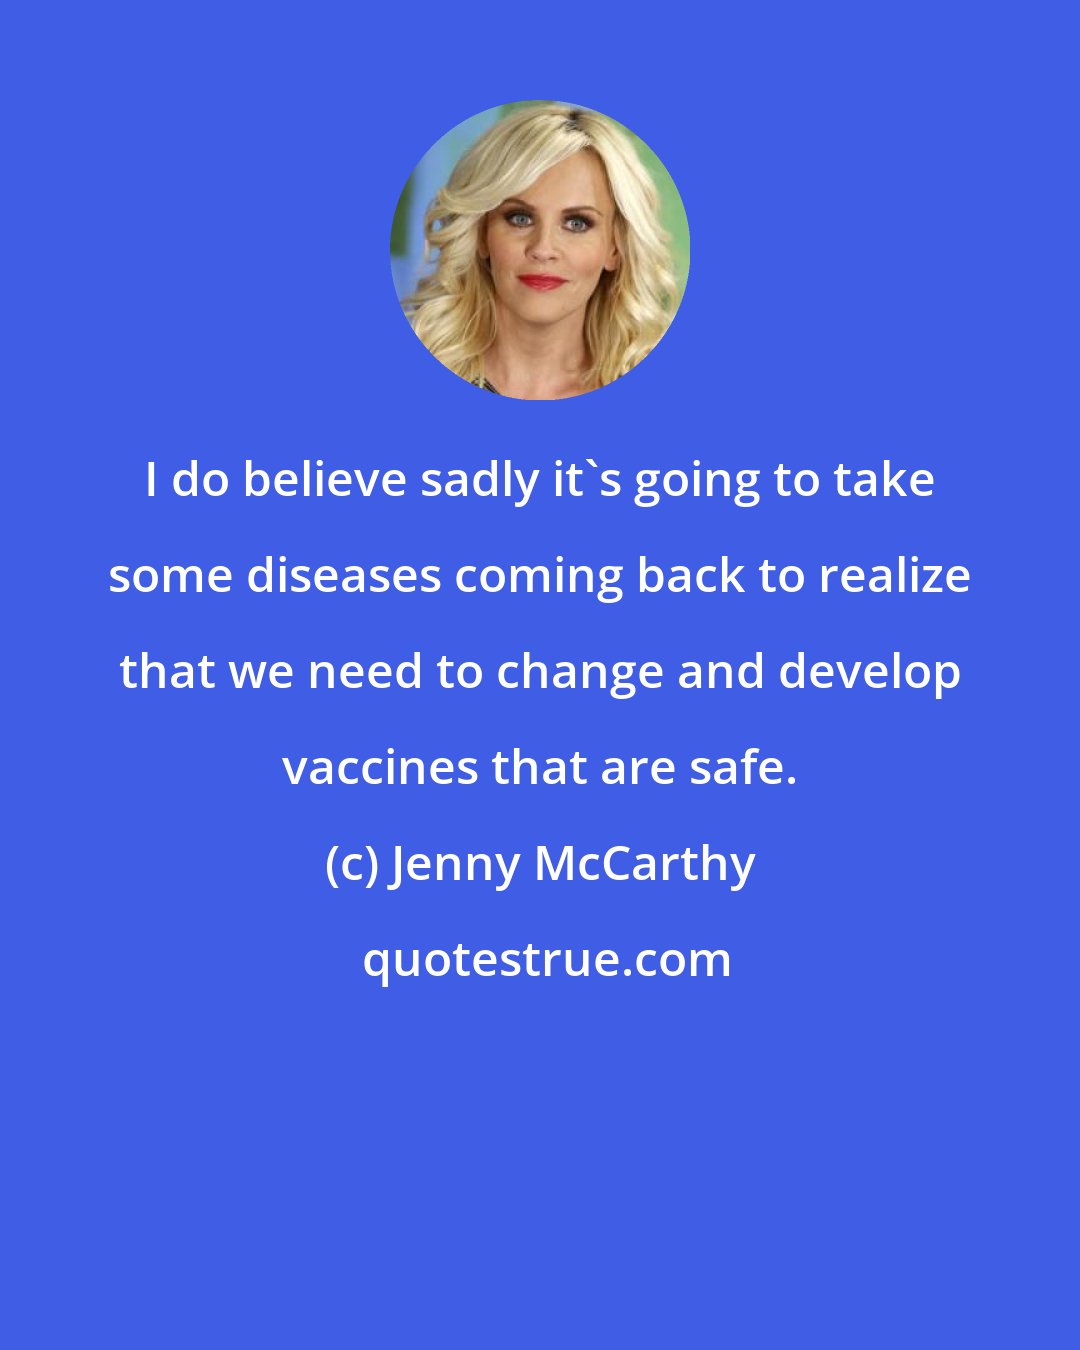 Jenny McCarthy: I do believe sadly it's going to take some diseases coming back to realize that we need to change and develop vaccines that are safe.